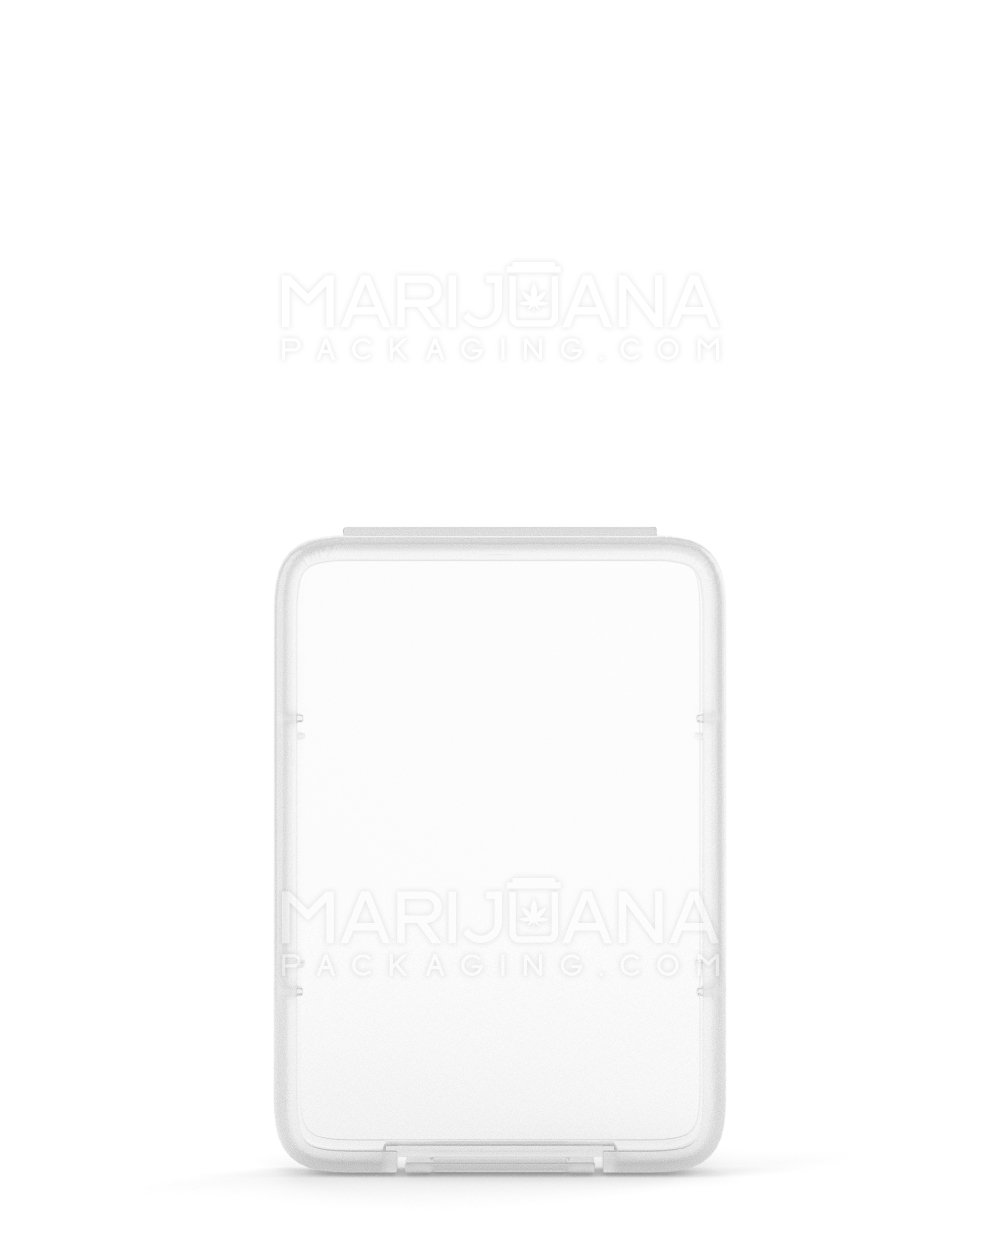 Hinged Lid Slim Shatter Container | 5.3mm - Clear Plastic - 1000 Count - 5